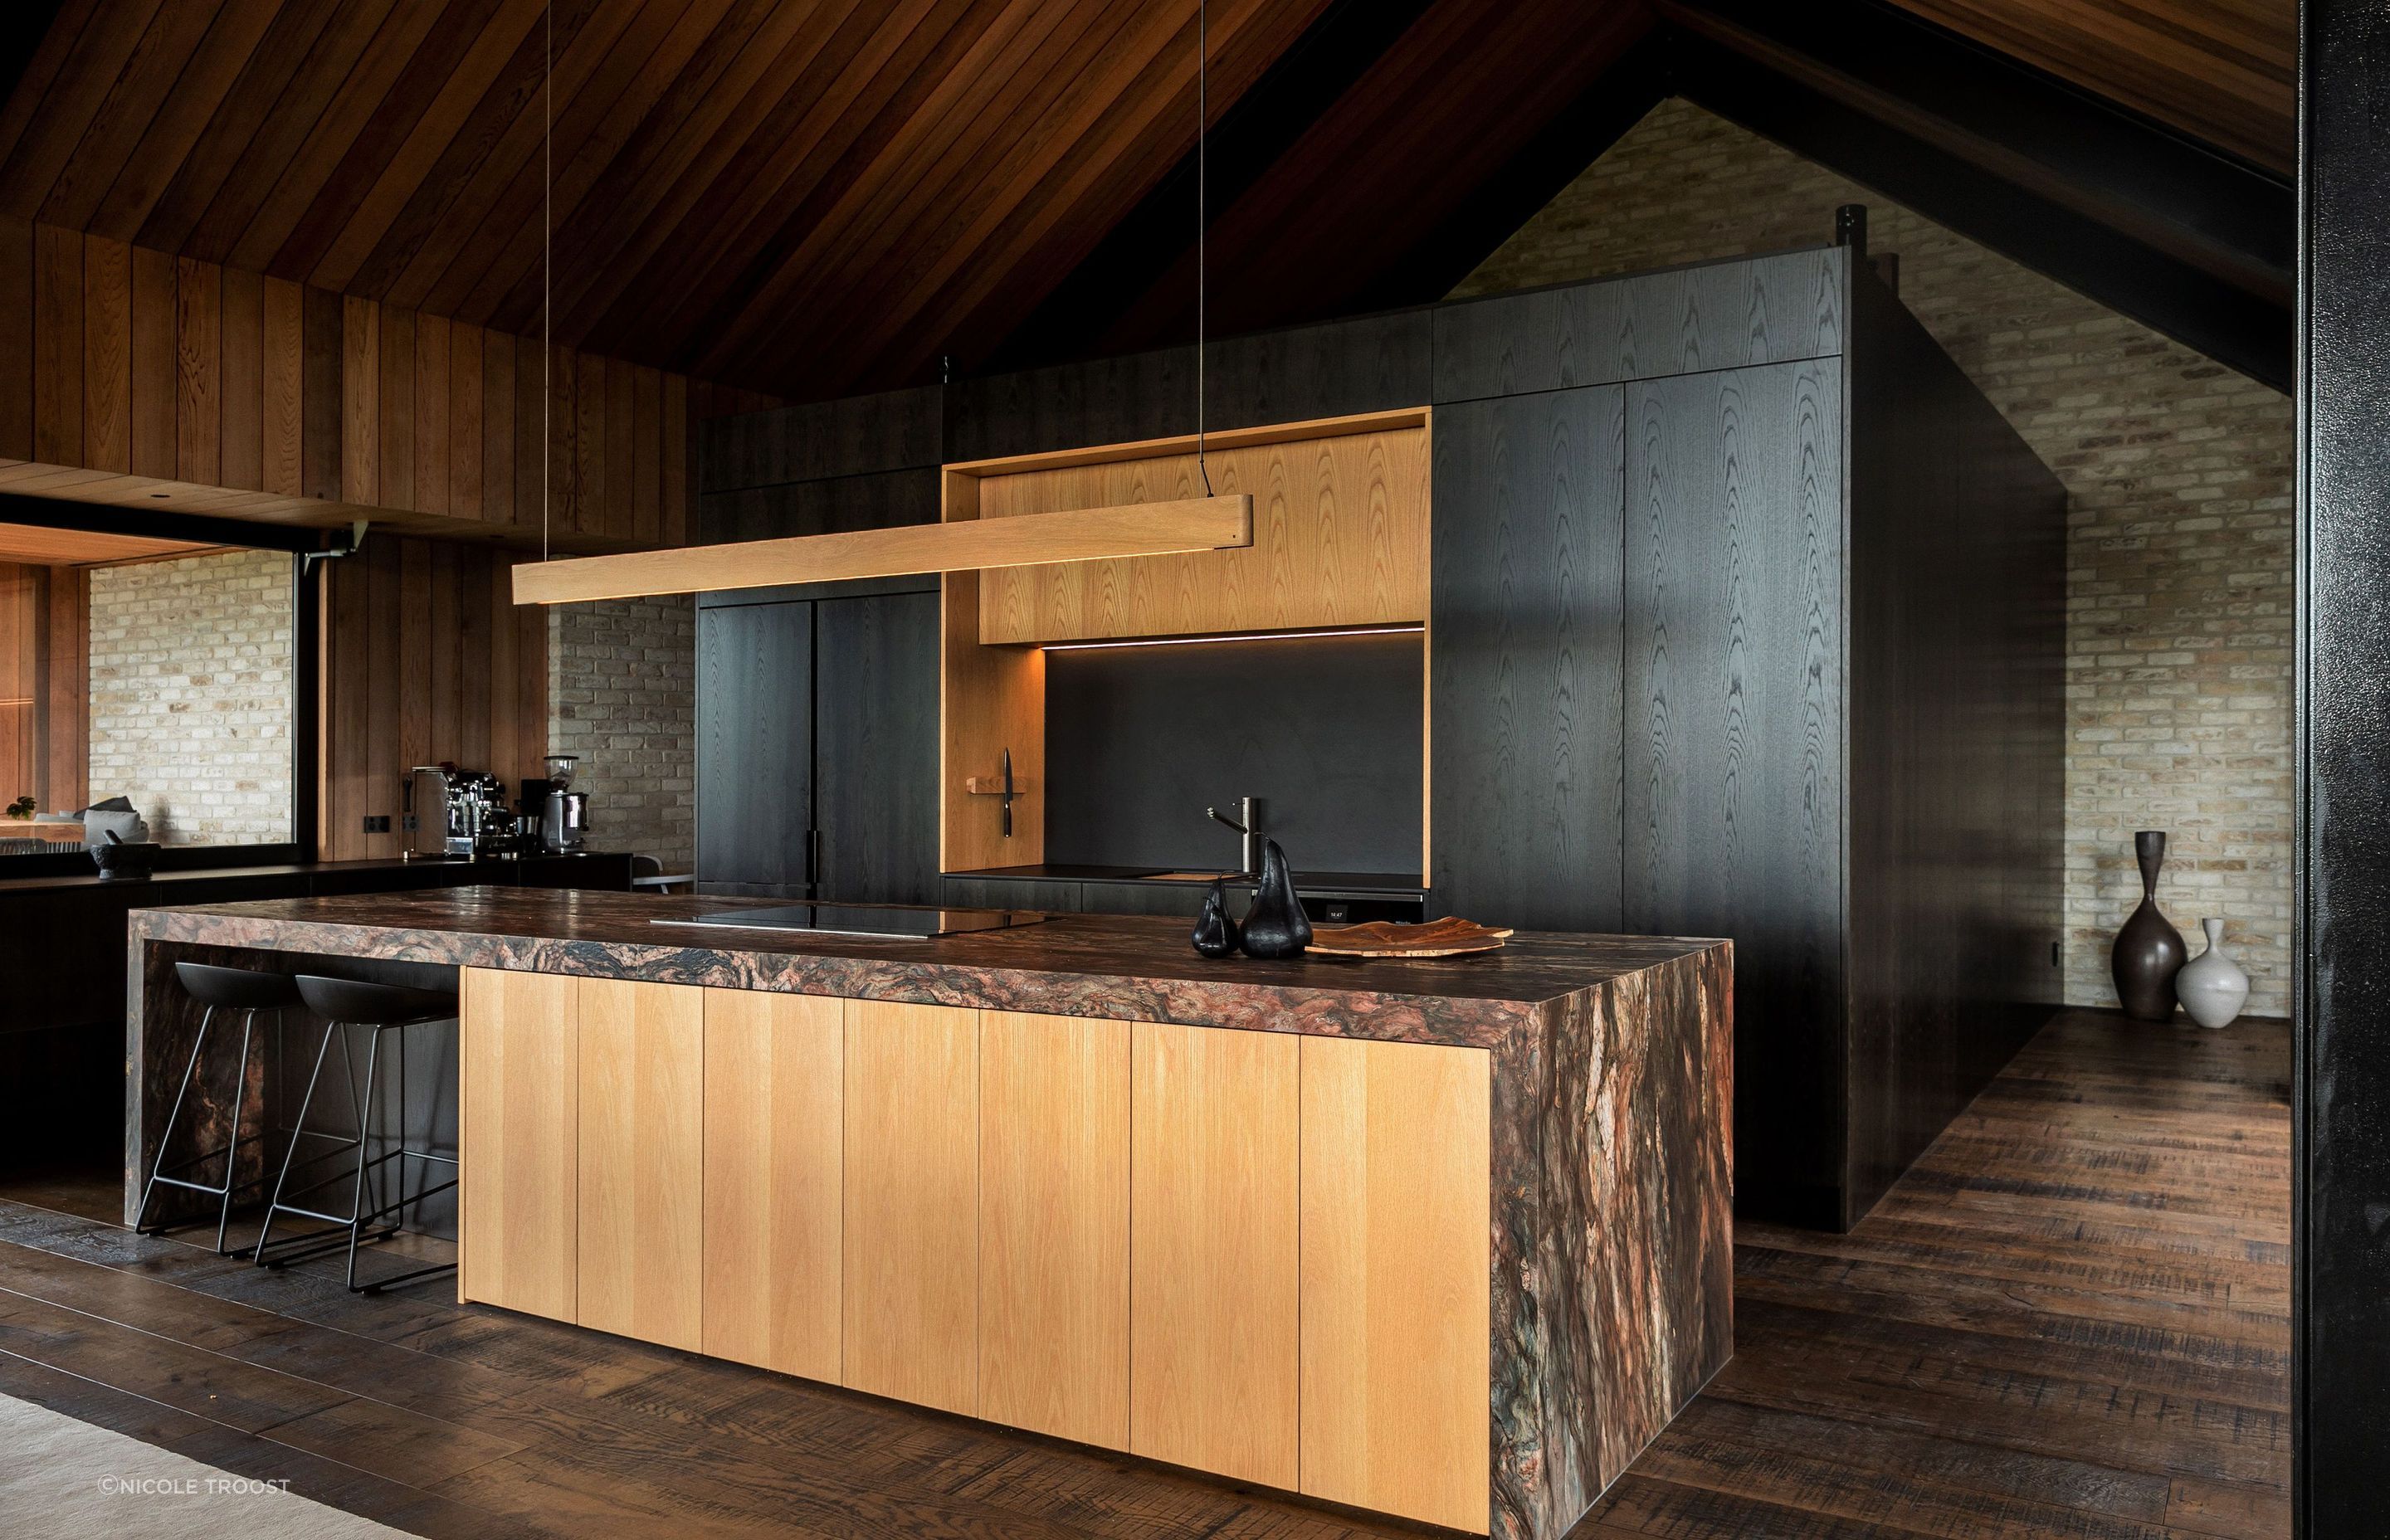 The kitchen features a stunning stone kitchen island juxtaposed against light and dark timber veneer cabinetry.